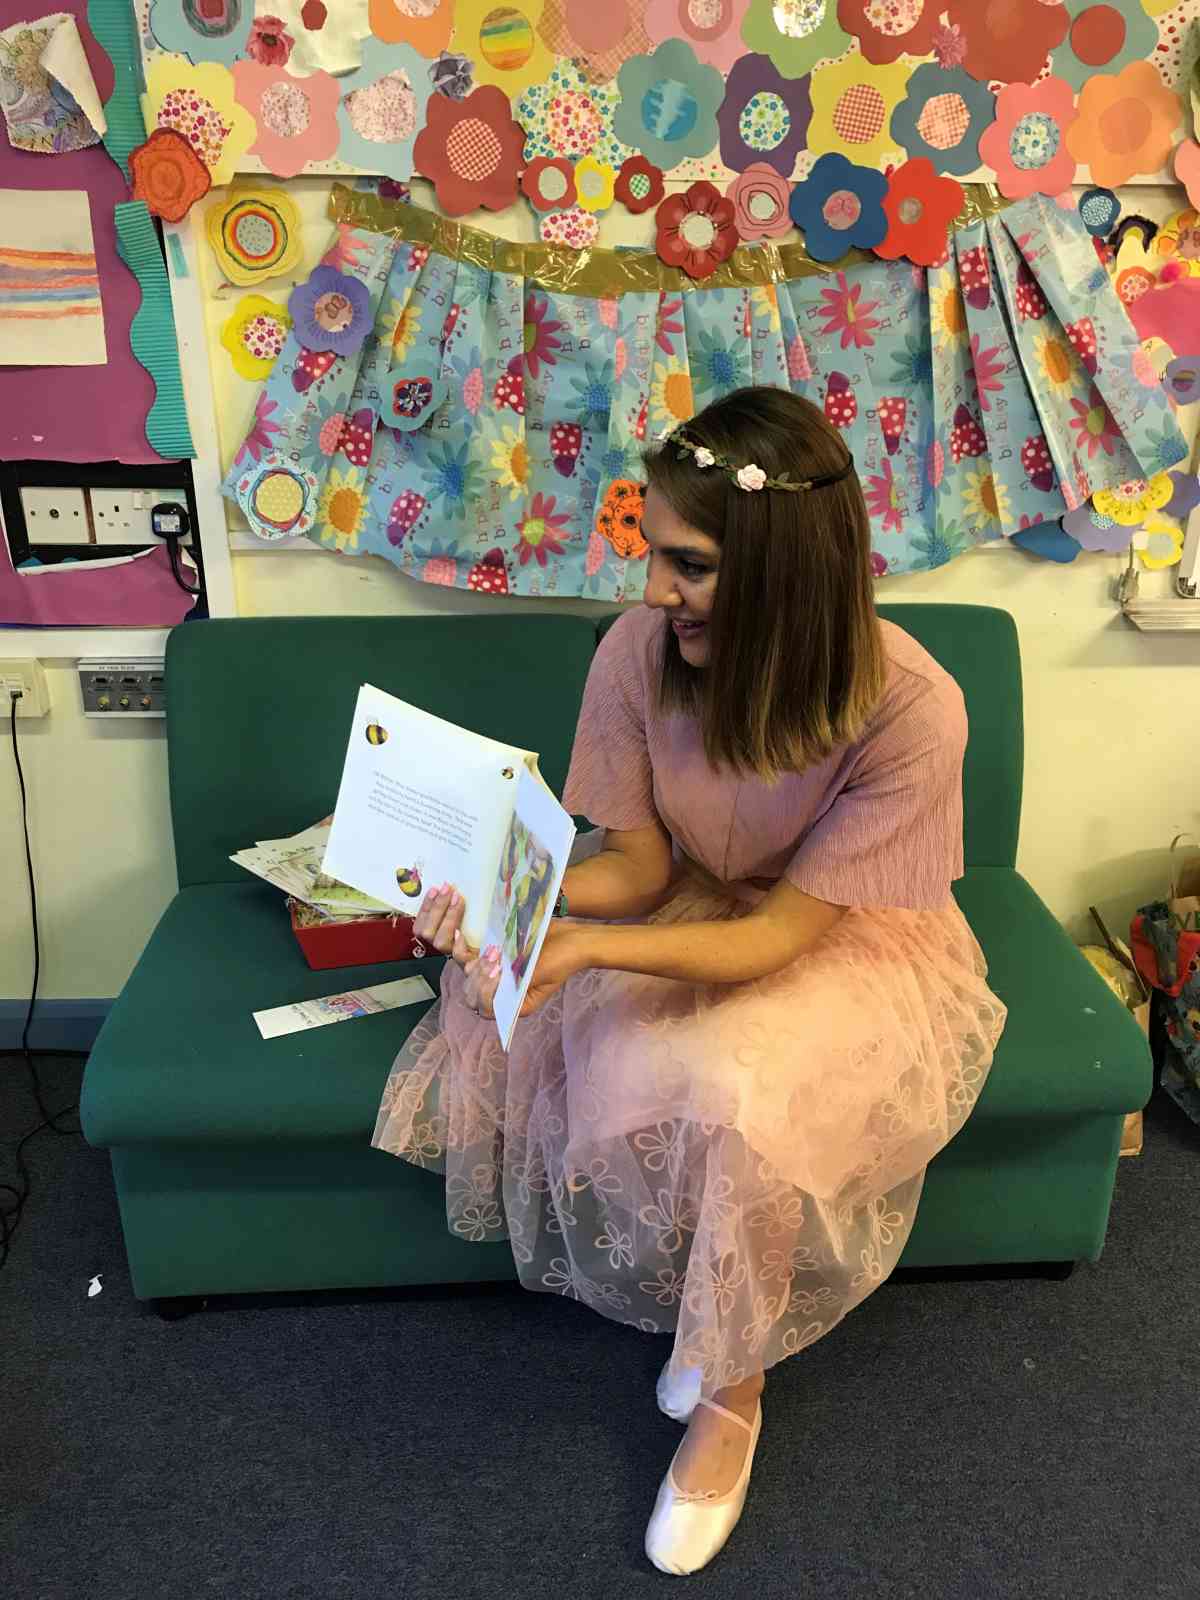 Lucy-Ela-Walmsley-The-Faery-Tales-Book-Reading-and-Signing-Event-at-School-austin-macauley-publishers-ltd